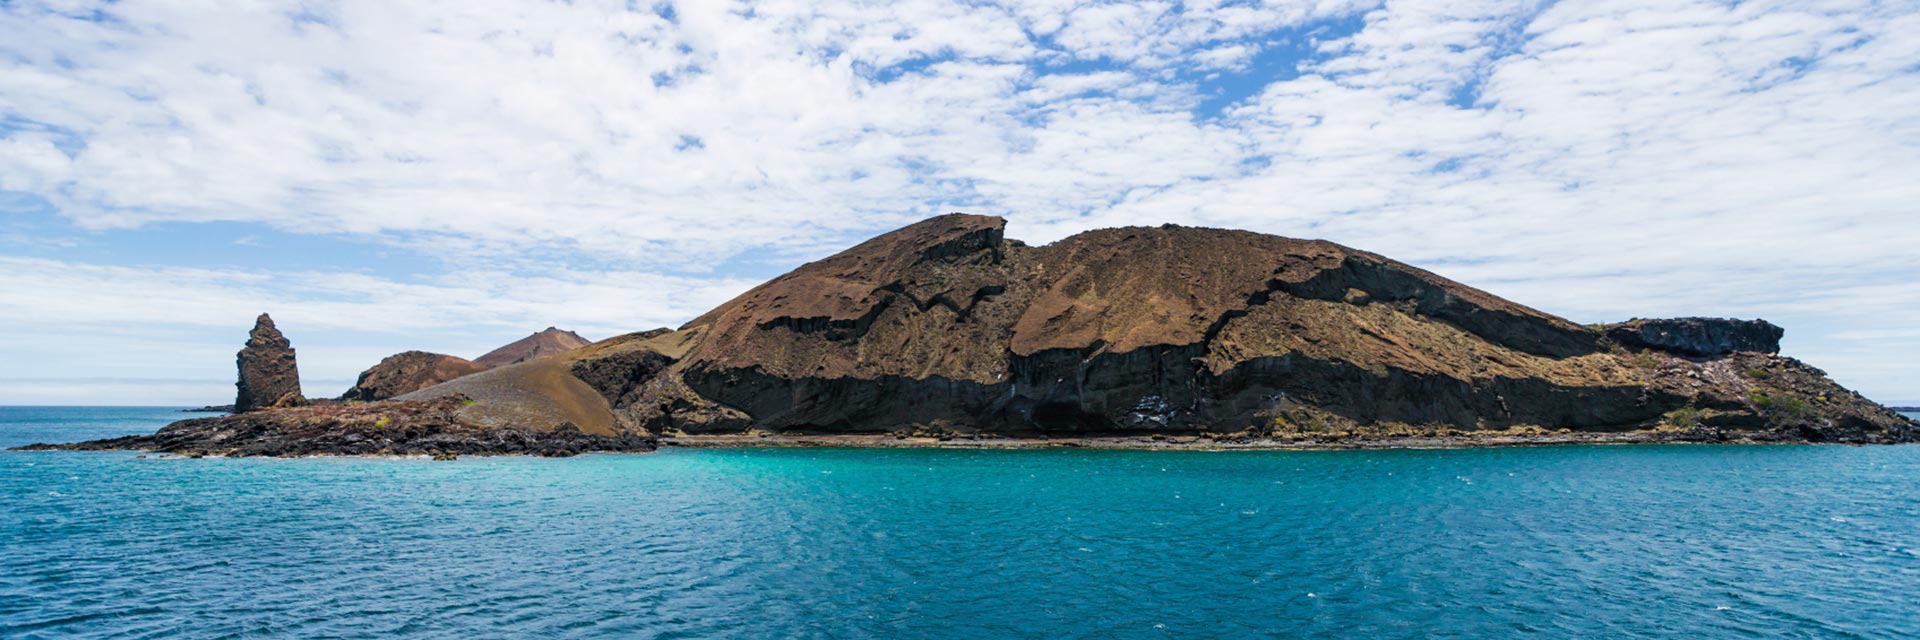 Contact our Spanish School on the Galapagos Islands - © Miralex